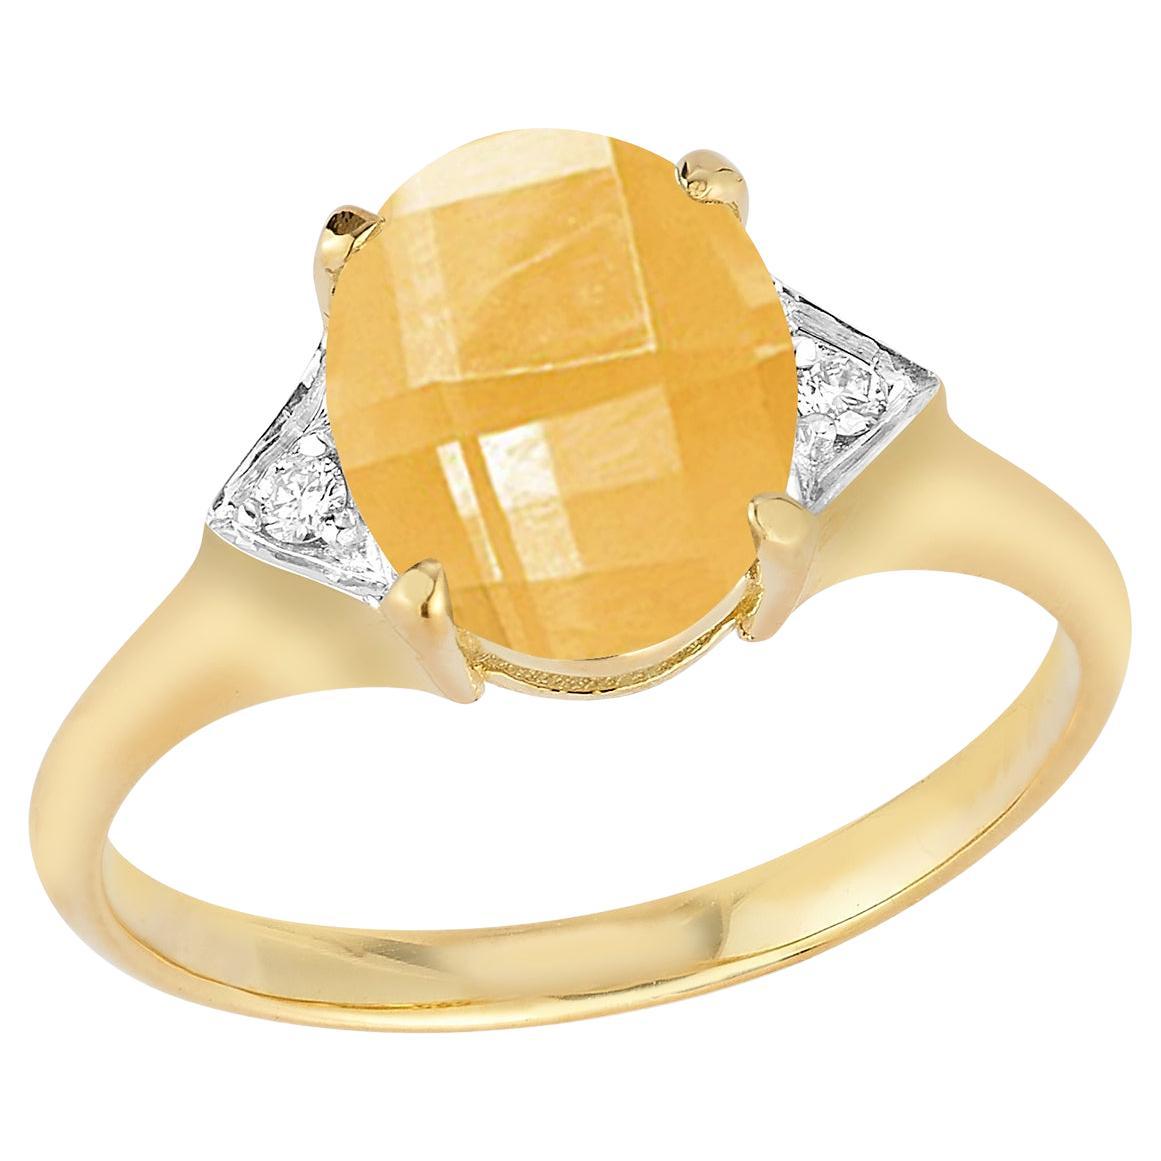 For Sale:  Hand-Crafted 14K Yellow Gold 0.05 ct. tw. Diamond & 4.75CT Citrine Cocktail Ring